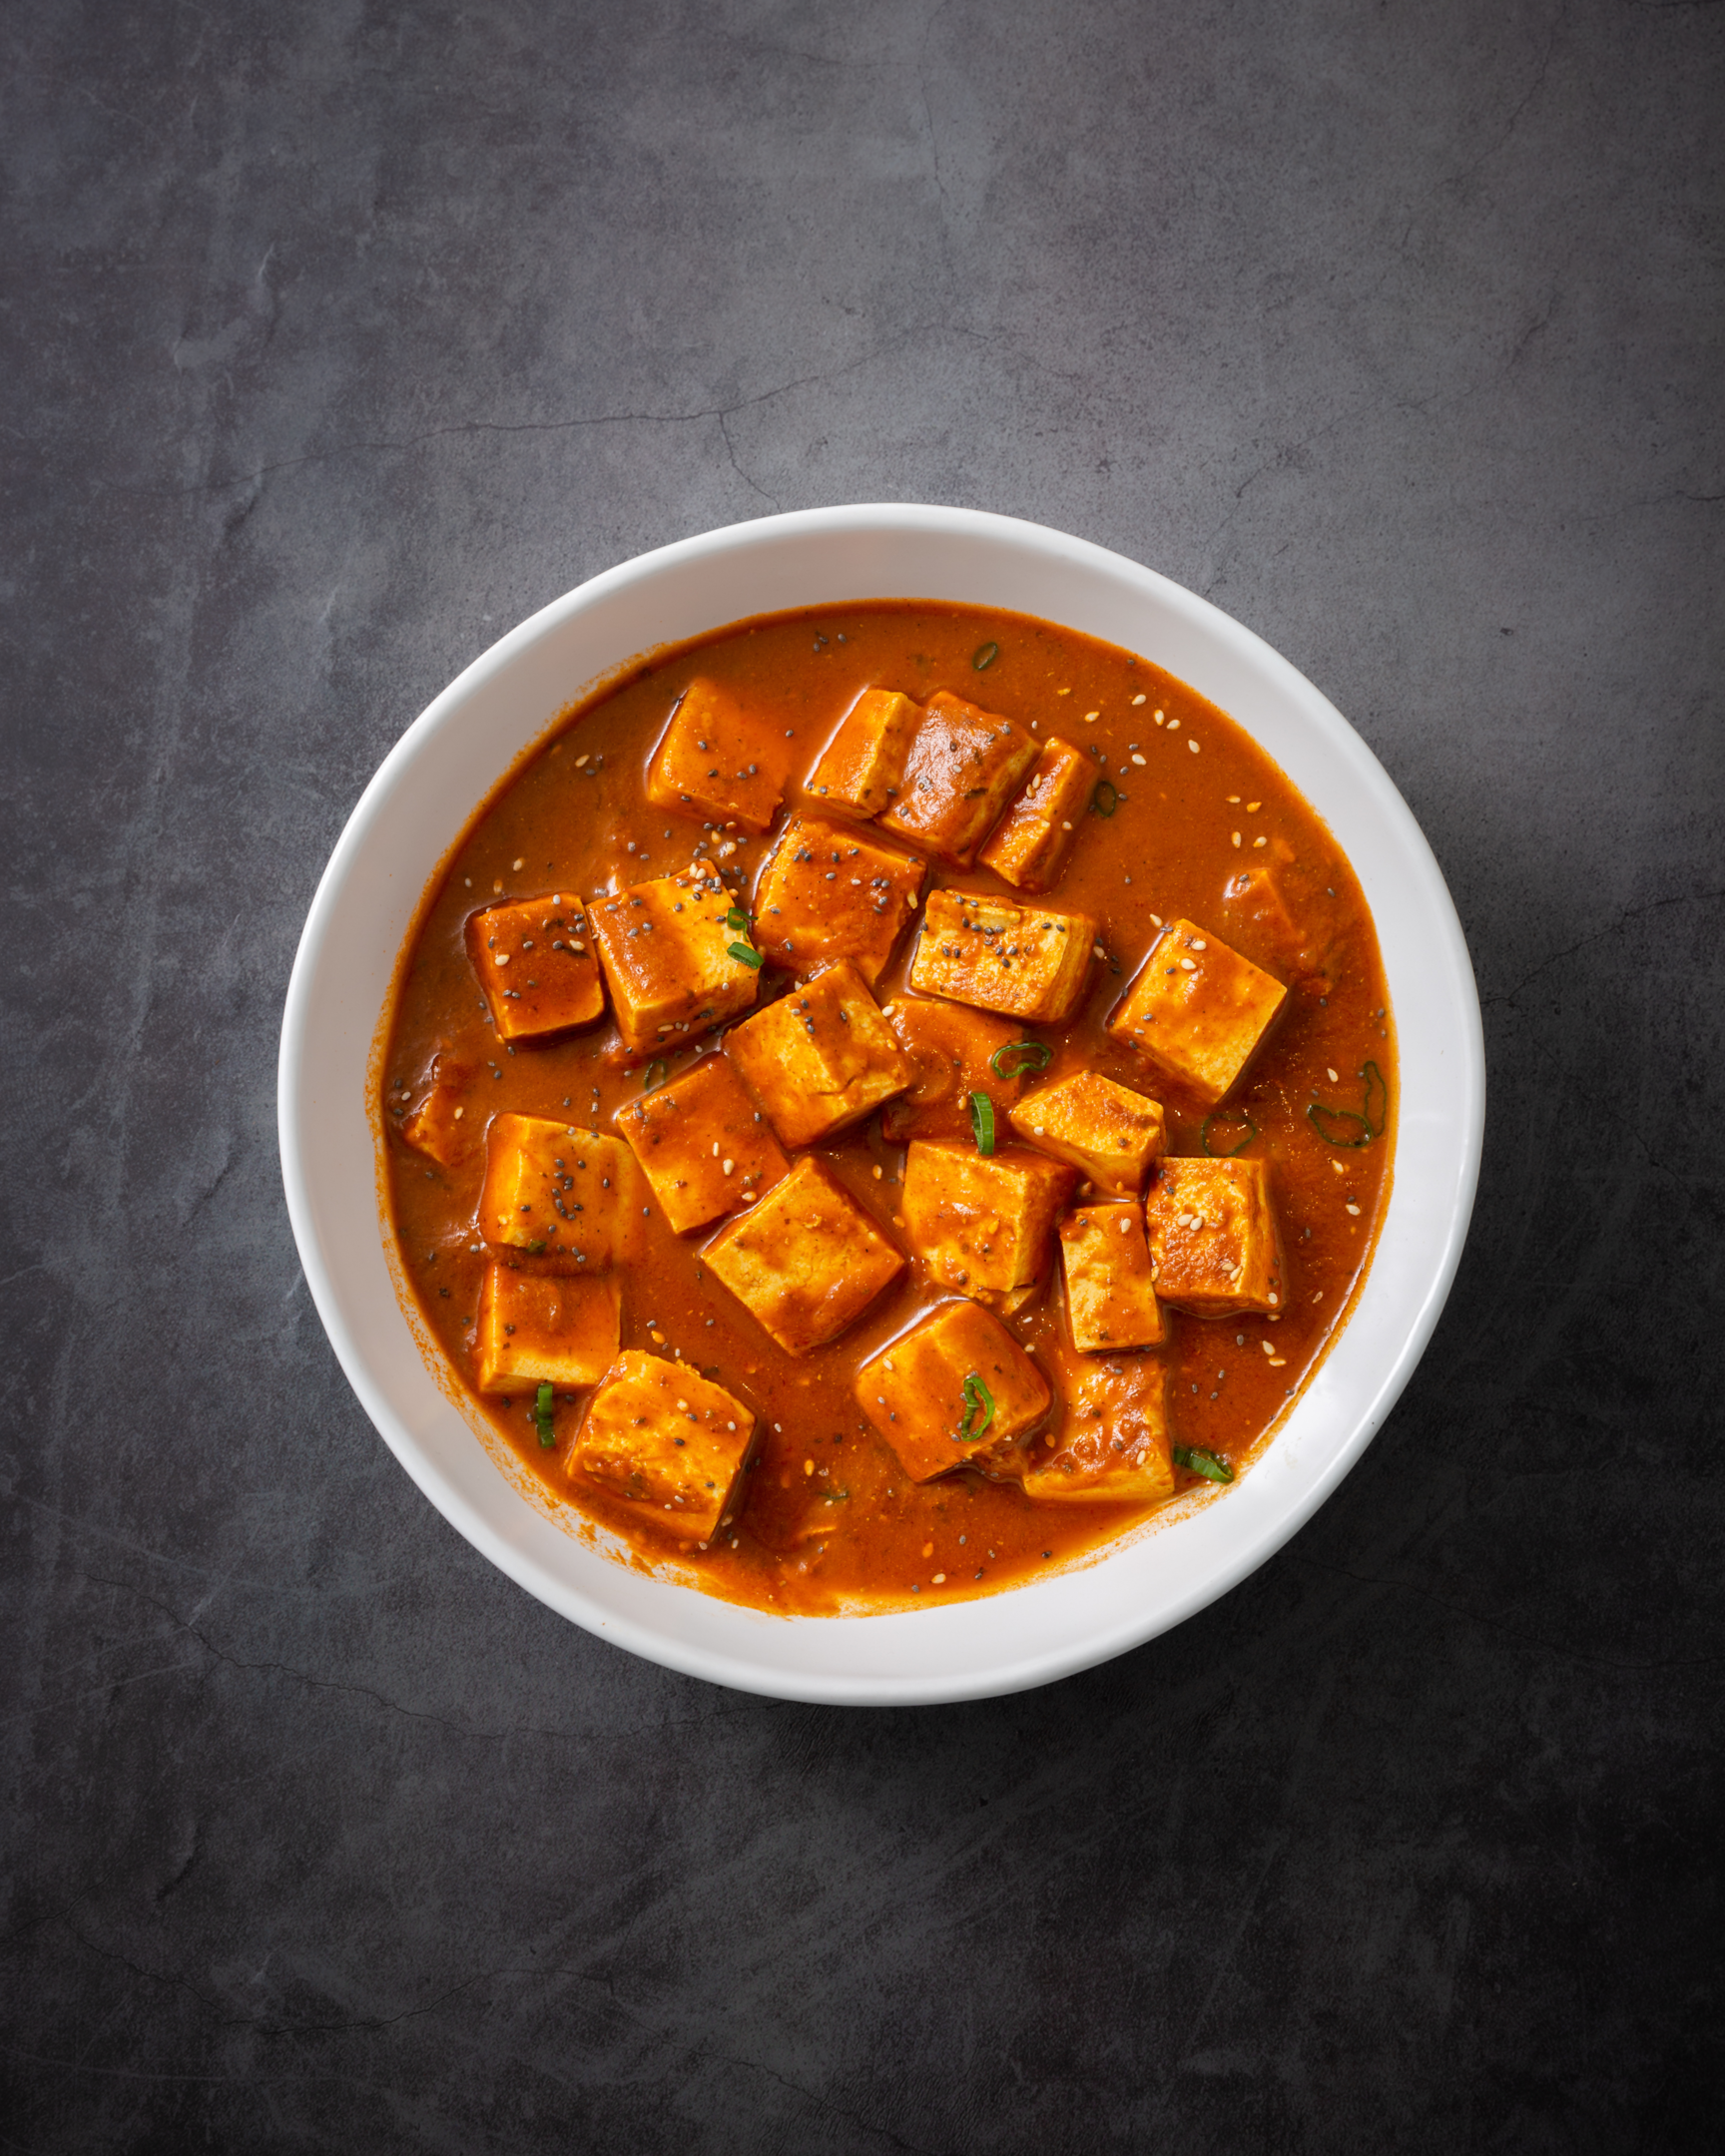 Image showing a delicious plate of Paneer Butter Masala, a popular Indian dish with global influence.